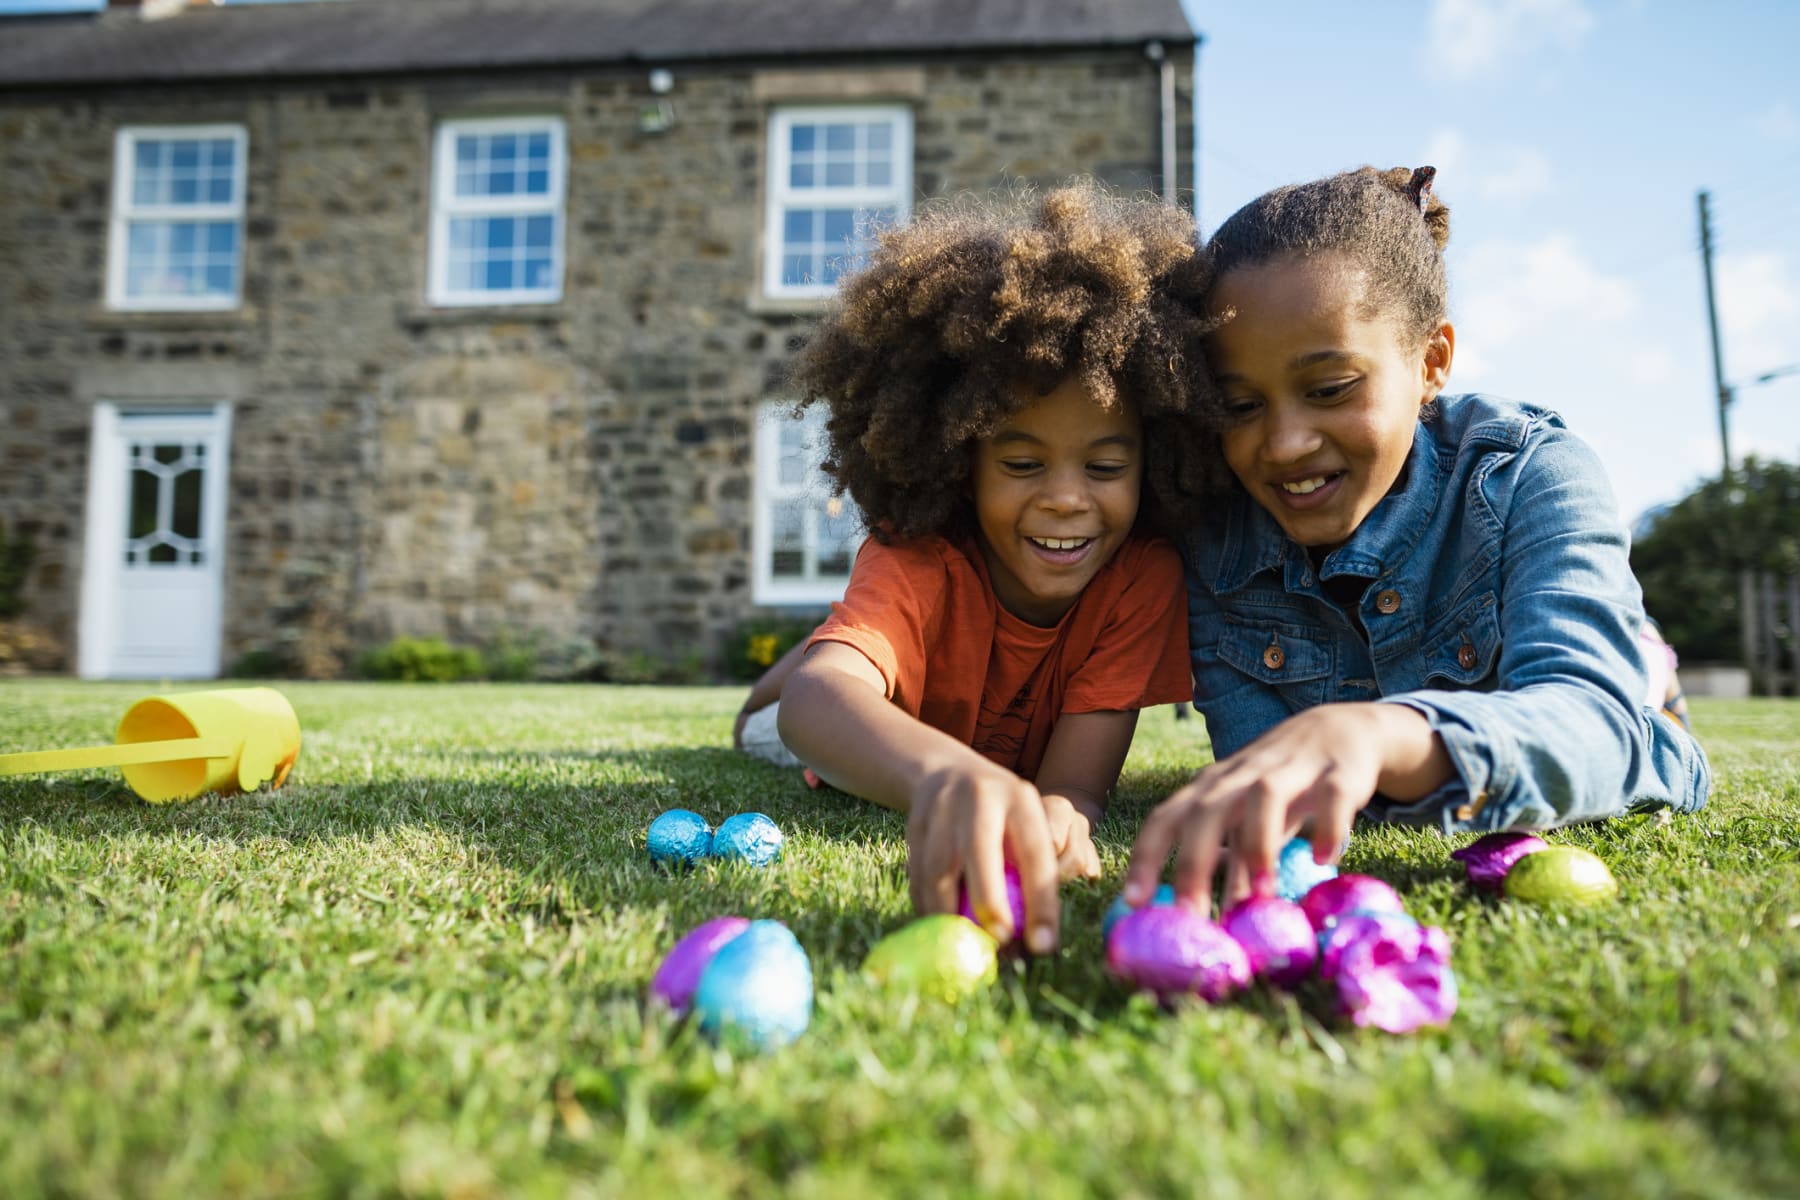 Siblings play with Easter eggs on lawn.